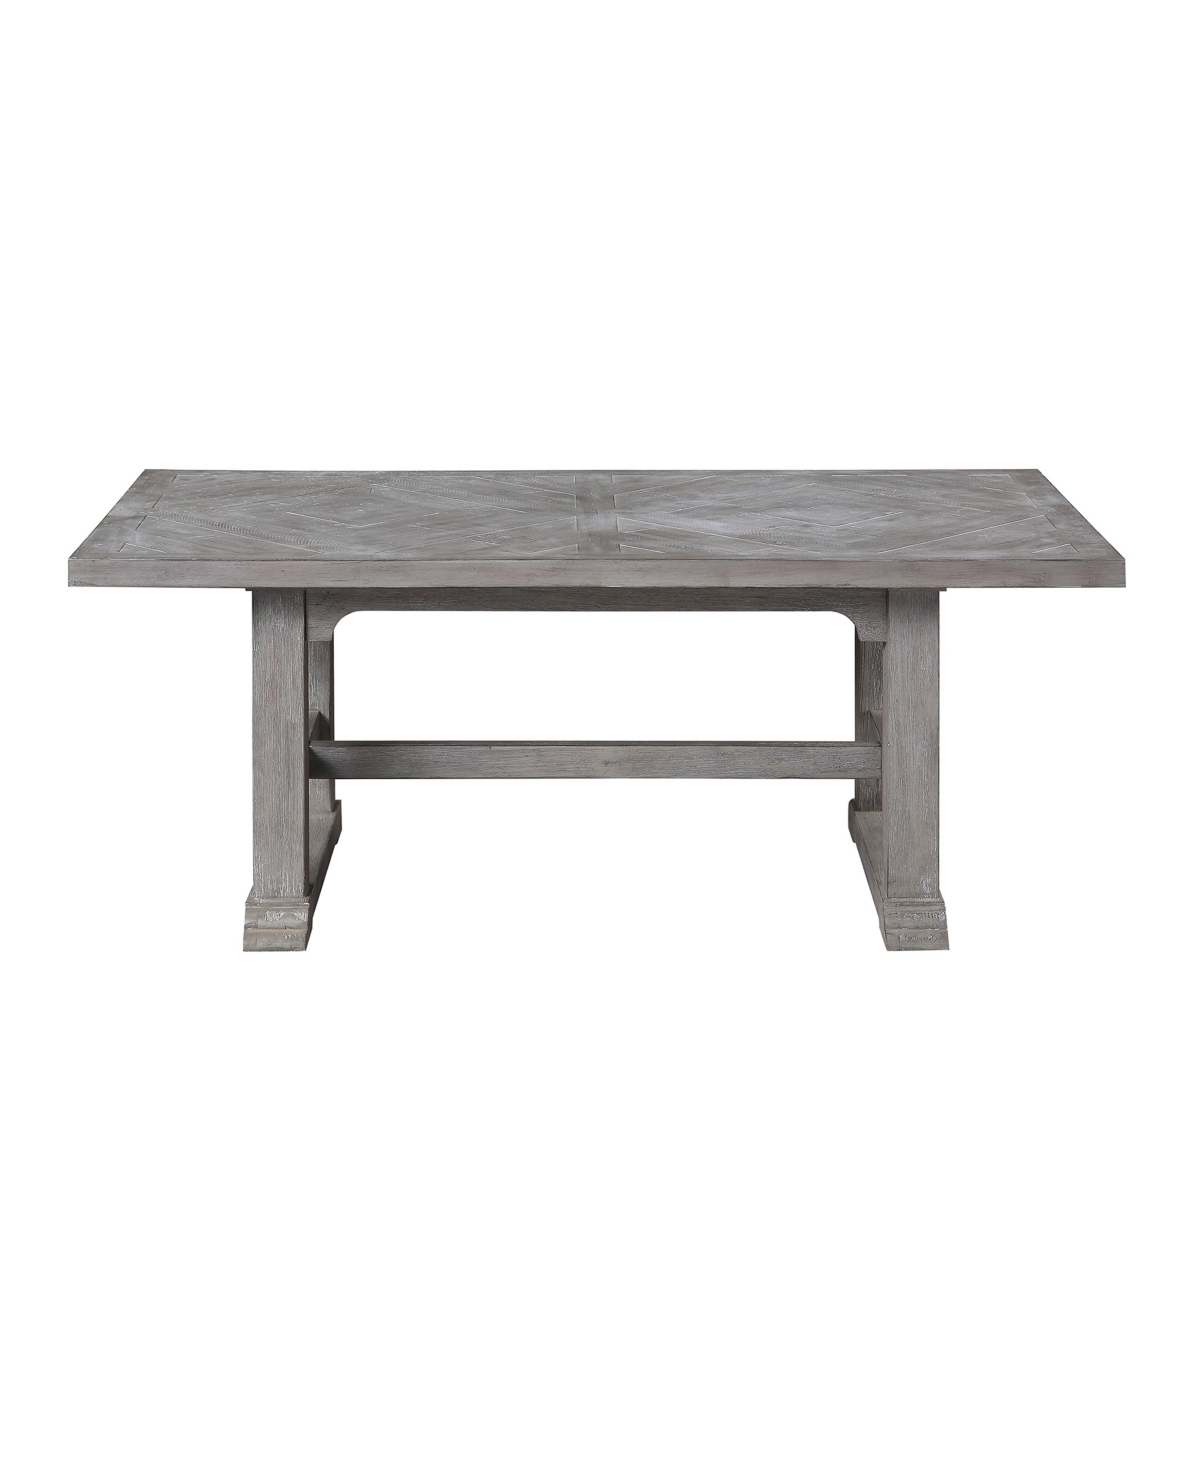 Steve Silver Whitford 48" Distressed Wood Coffee Table In Dove Gray Finish